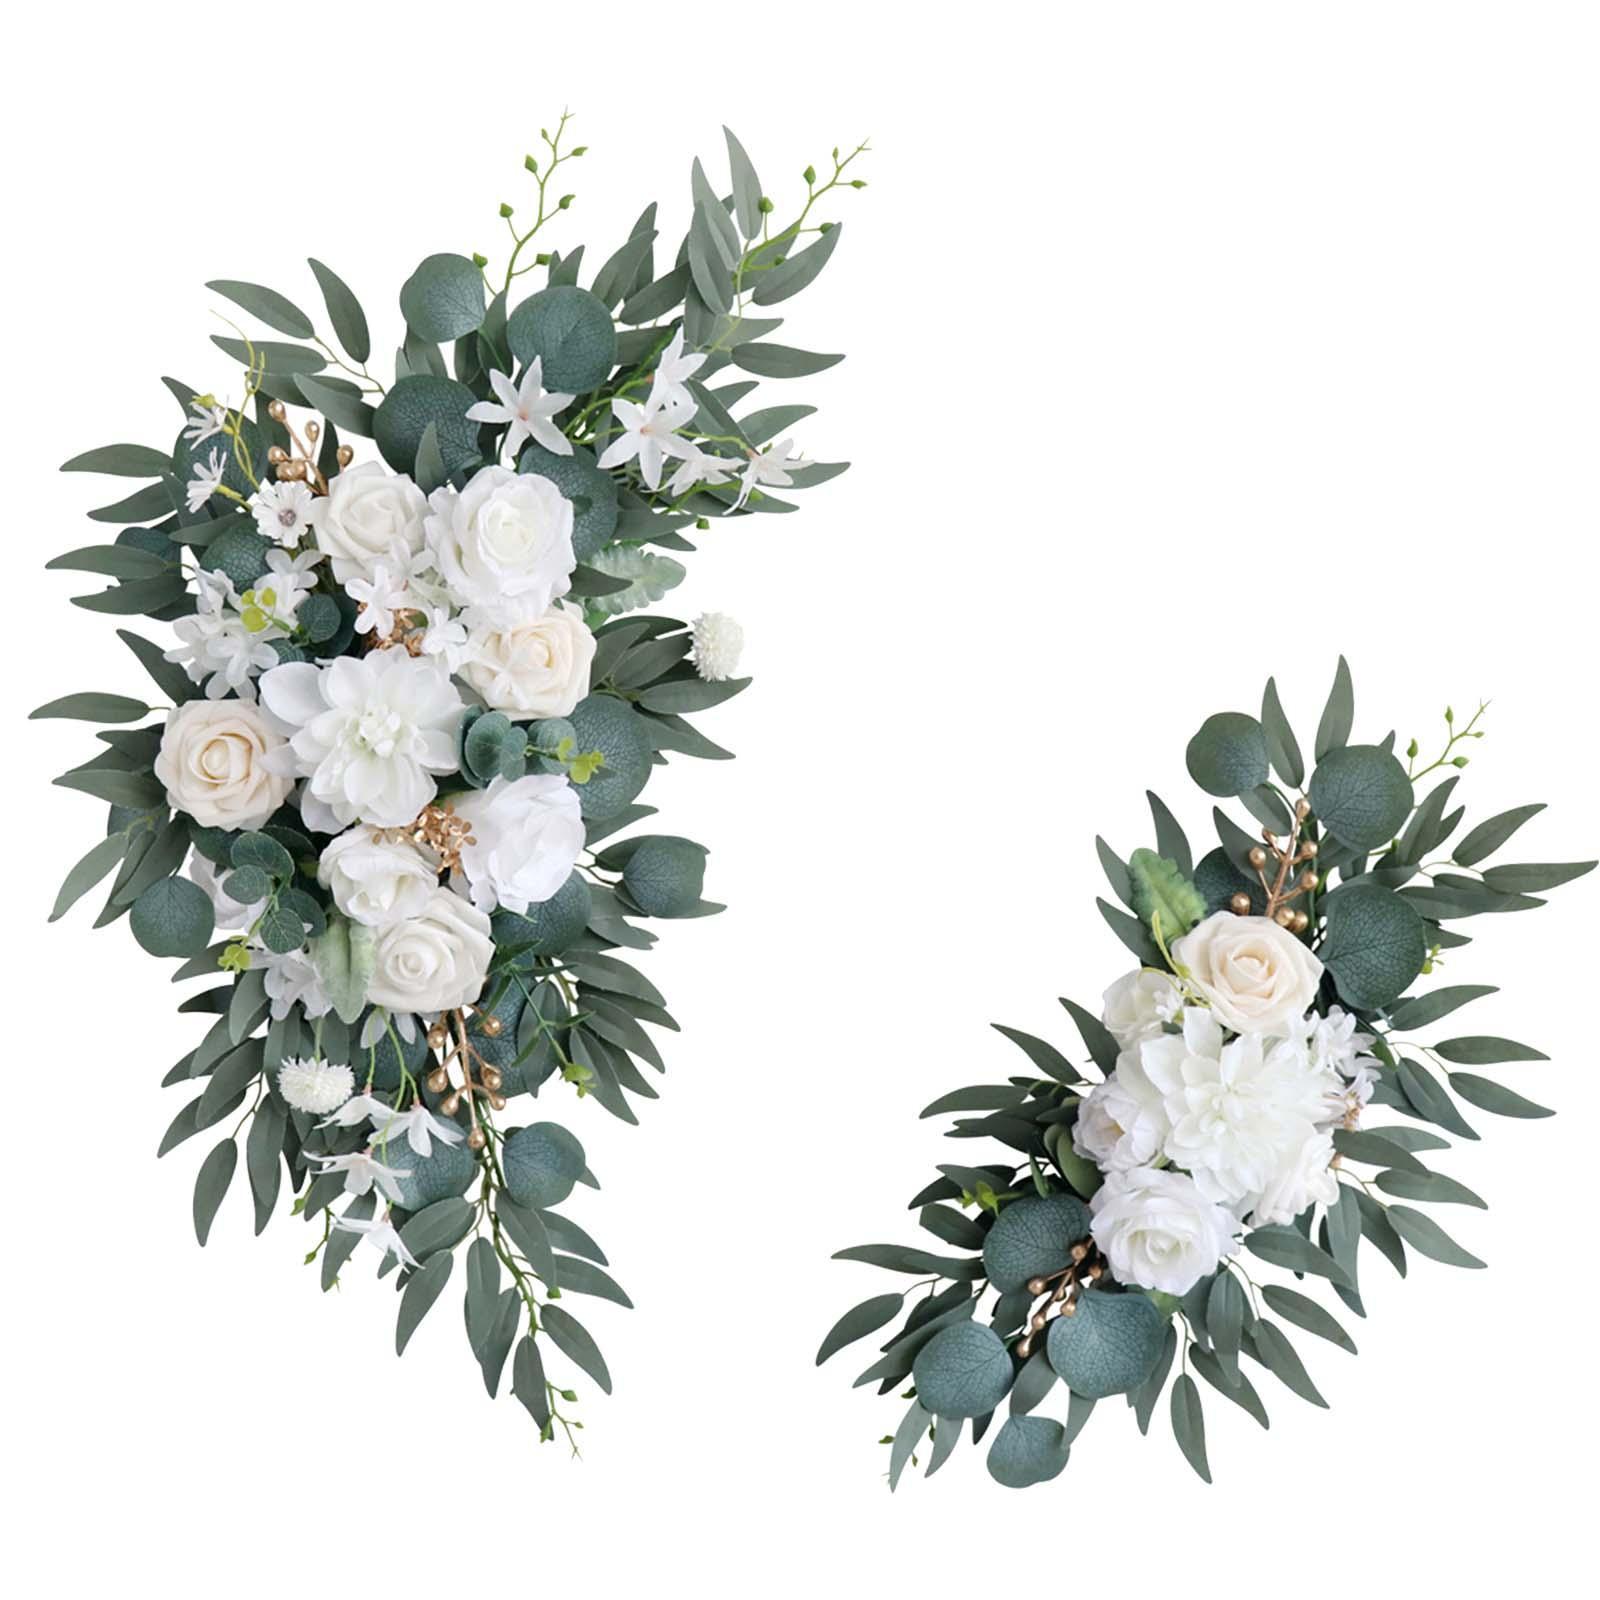 Wedding Arch Rose Wreaths Artificial Flower Swag Hanging Green Leaves Farmhouse Rustic Wedding Arch Swag for Reception Table Arbor Ornament